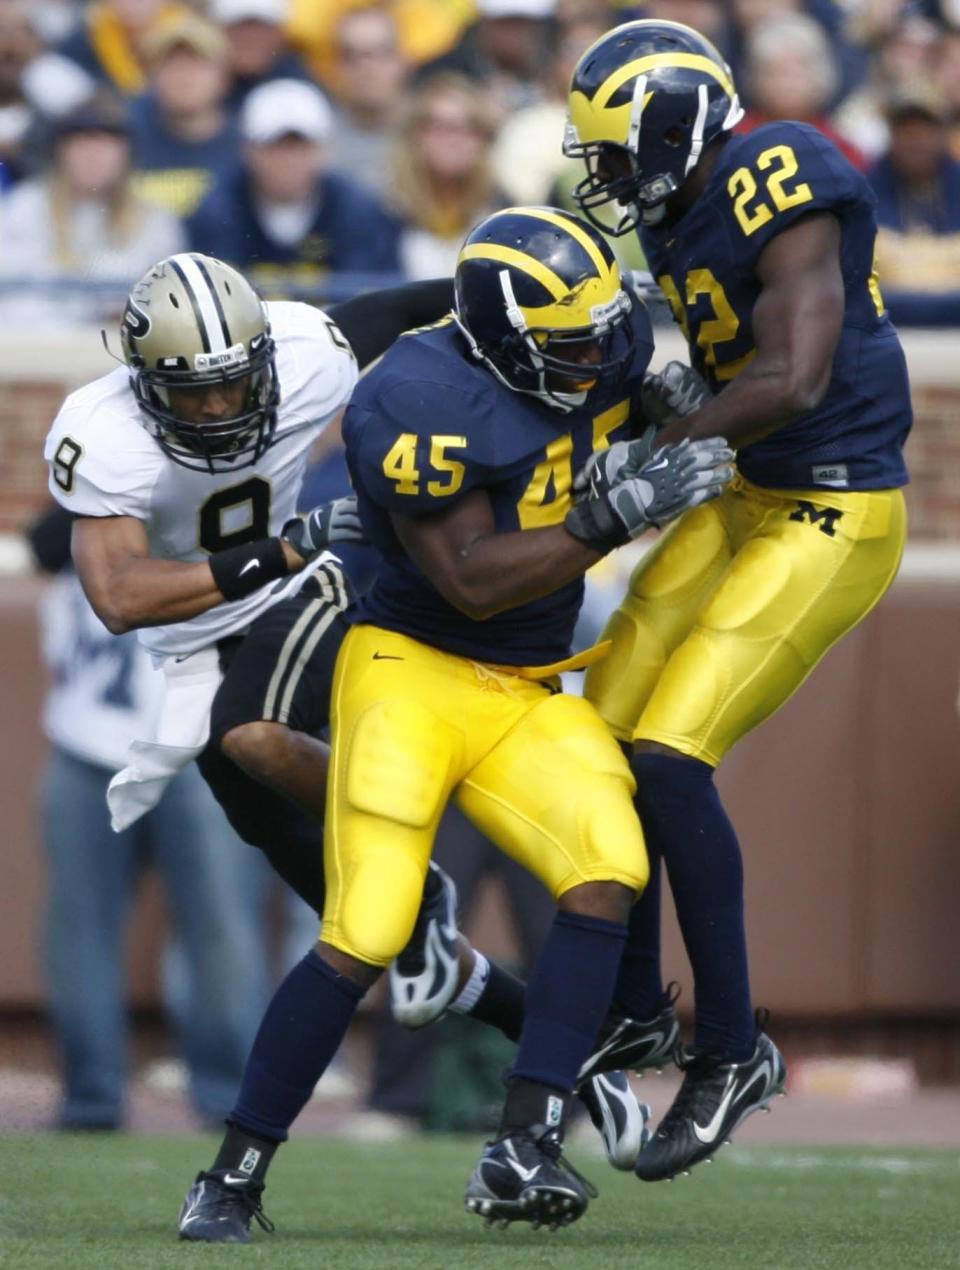 Michigan's Obi Ezeh (45) and Doug Rogan (22) separated Purdue's Keith Smith from a would-be reception that ended up in the hands of Michigan's Brandon Harrison for an interception late in the first half in Ann Arbor on Saturday, Oct. 13, 2007.